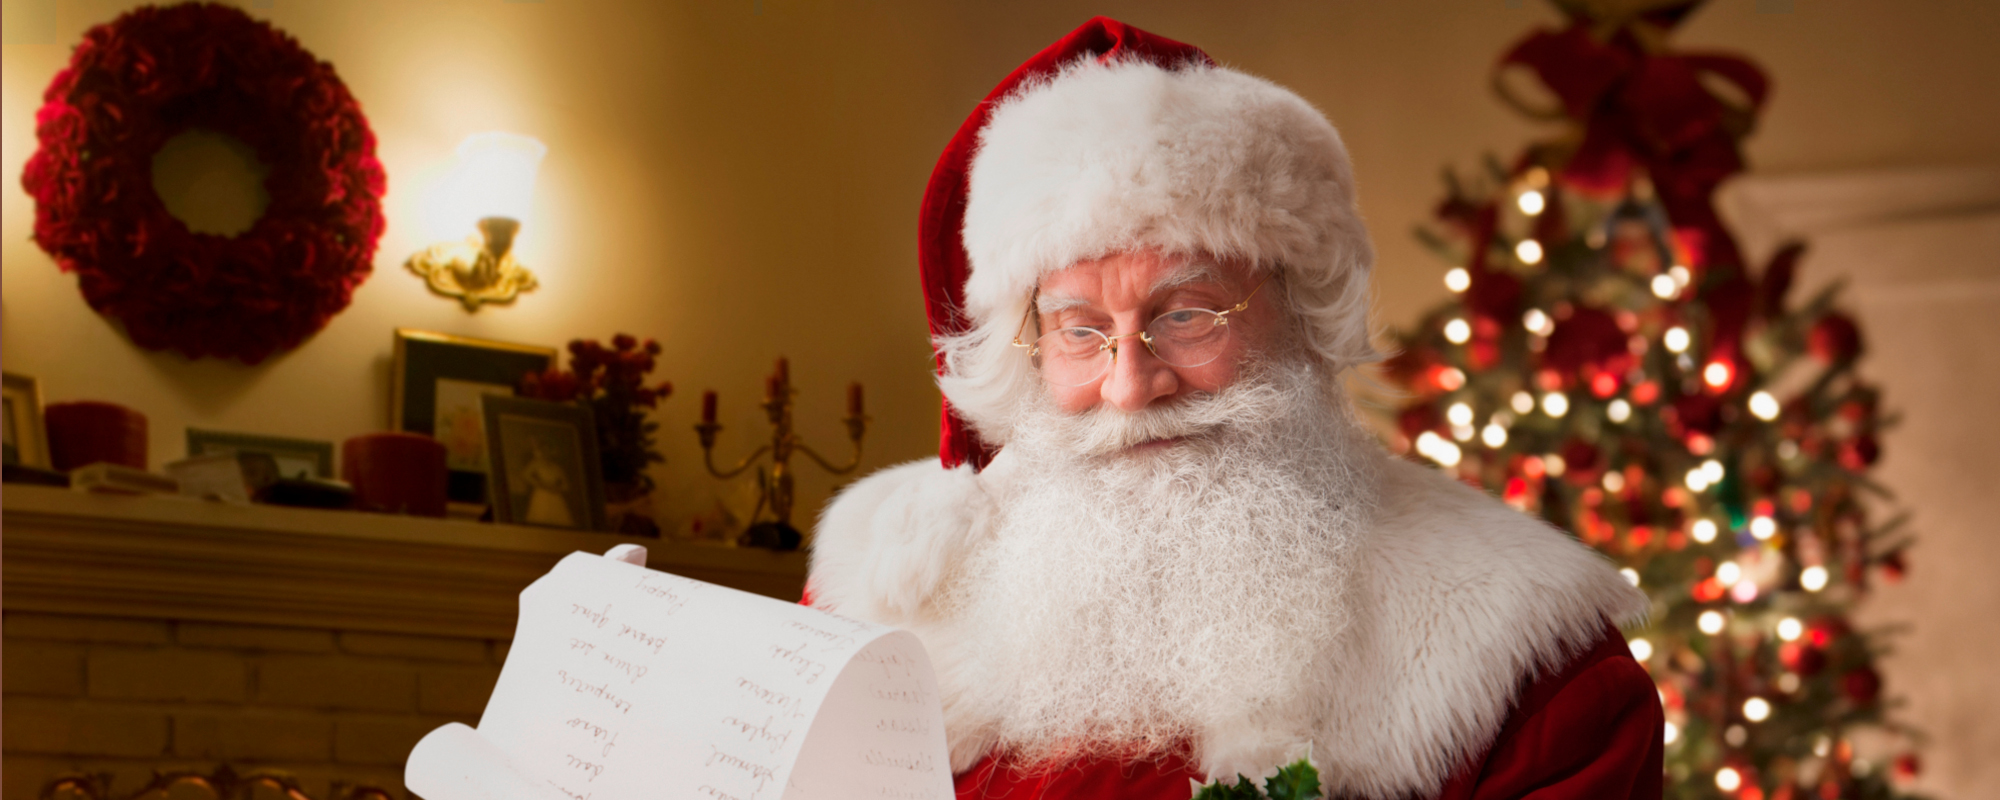 Behind the History and Meaning of the Name: Santa Claus